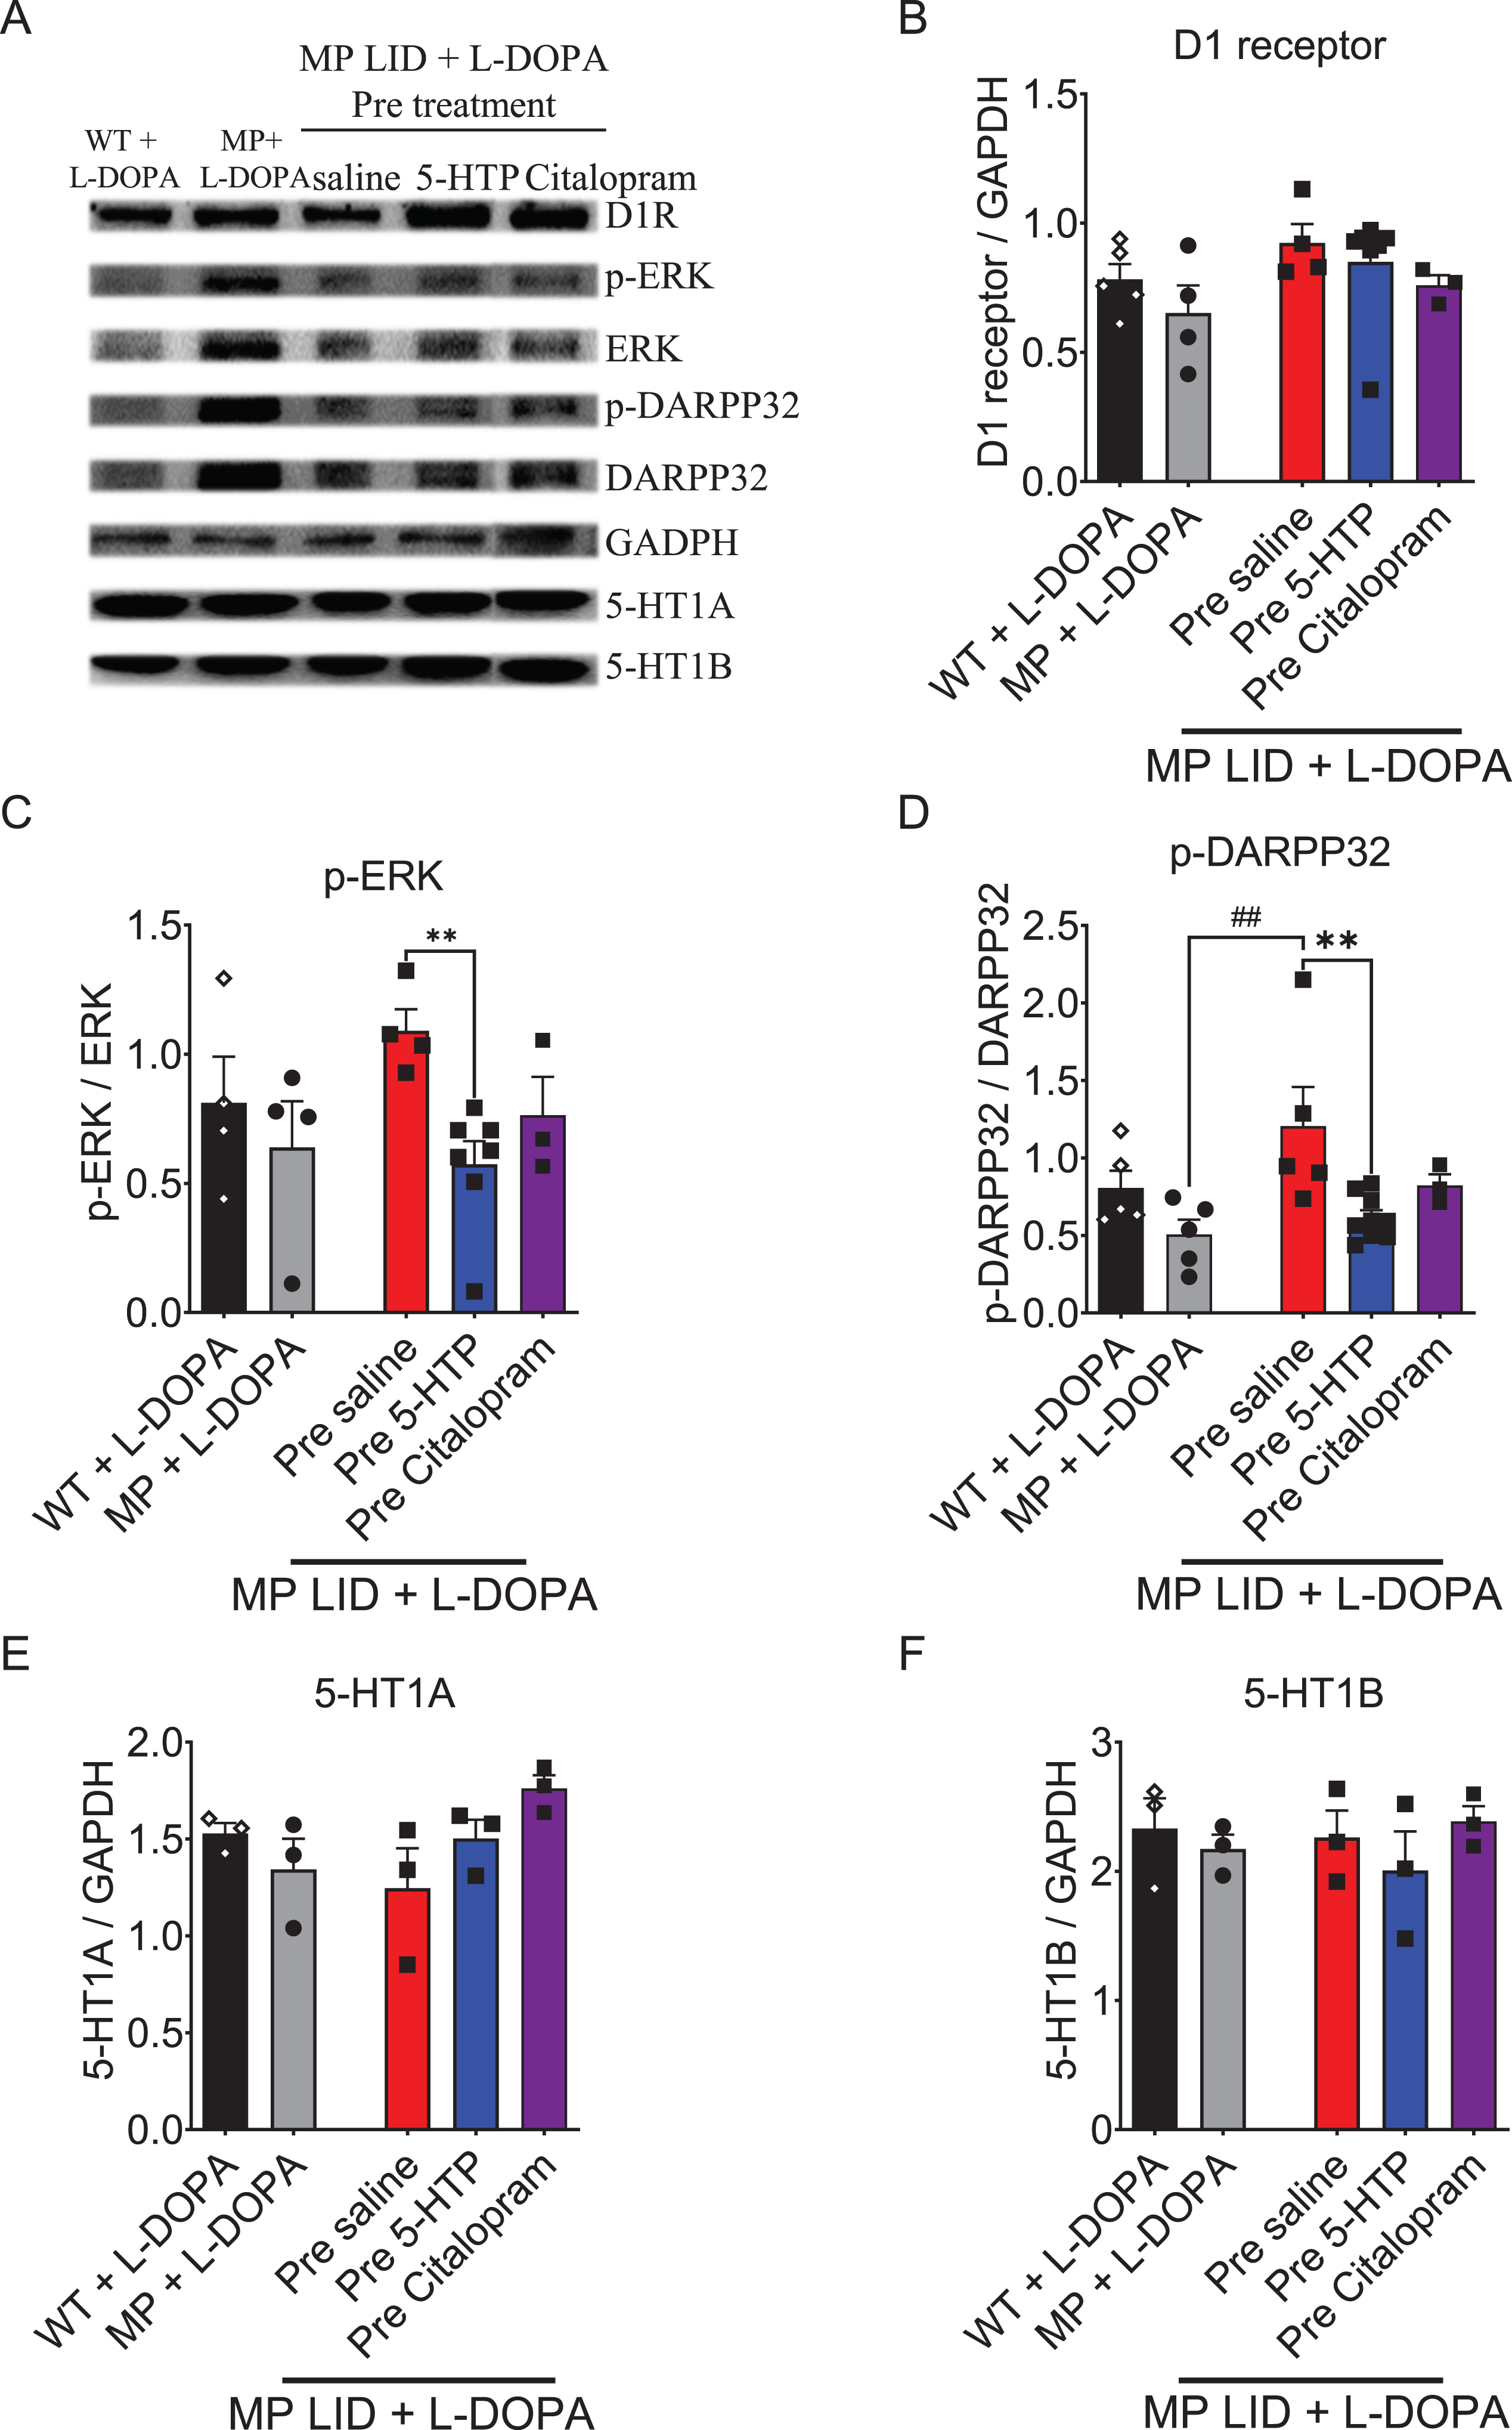 The expression of proteins involved in dopaminergic and serotonergic transmission was analyzed in the striatum of WT, MP, and MP LID mice following co-treatment of L-DOPA with 5-HTP or Citalopram. A) Dopaminergic and serotonergic transmission-related protein expression in the striatum were illustrated. B) There was no significant change in D1 receptor protein expression among these groups. However, the administration of 5-HTP effectively suppressed the increased phosphorylation of signaling molecules in the downstream D1 pathway, specifically ERK (red bar: MP LID + Saline + L-DOPA vs. blue bar: MP LID + 5-HTP + L-DOPA, p < 0.01) (C) and DARPP32 (p < 0.01) (D), in the MP LID mice. In contrast, the administration of Citalopram did not have a significant effect on the phosphorylation levels of these molecules. There were no significant changes in the expressions of 5-HT1A receptor (E) and 5-HT1B receptor (F) proteins among these groups. One-way ANOVA followed by a Bonferroni post hoc test for multiple comparisons. **p < 0.01, compared to MP LID + Saline + L-DOPA; MP compared to MP LID + Saline + L-DOPA, ##p < 0.01.